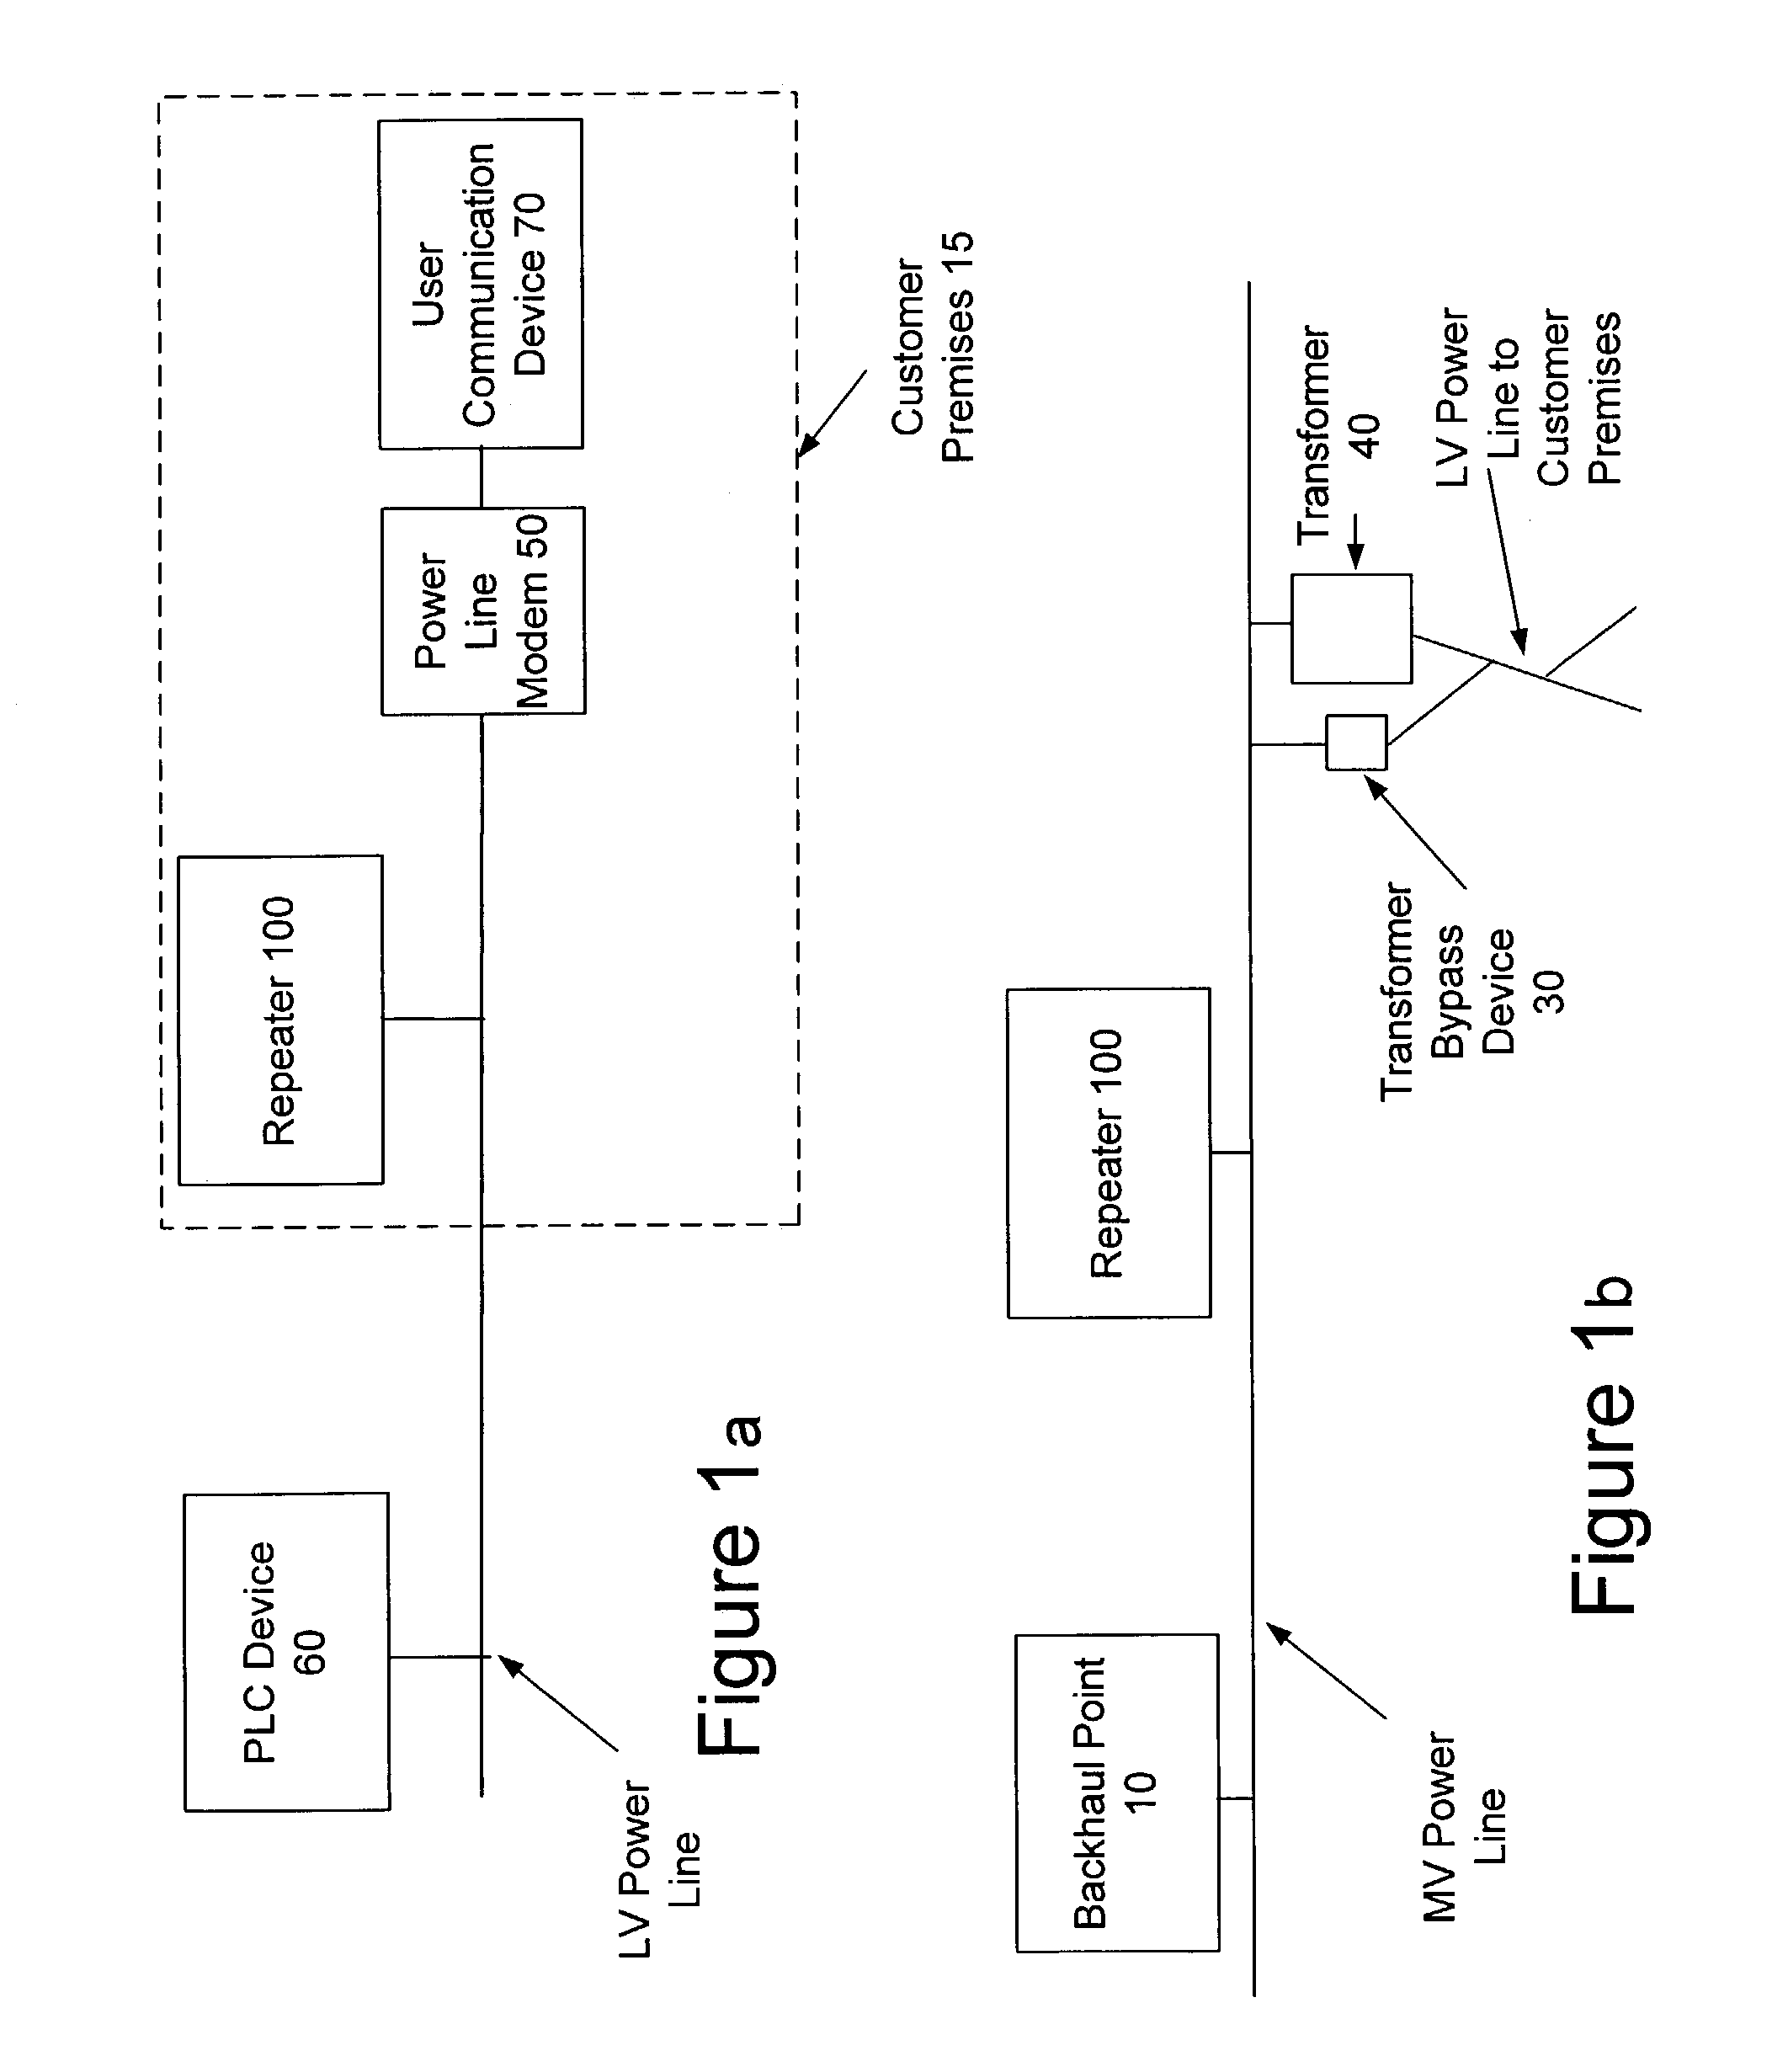 Power line communication device and method of using the same